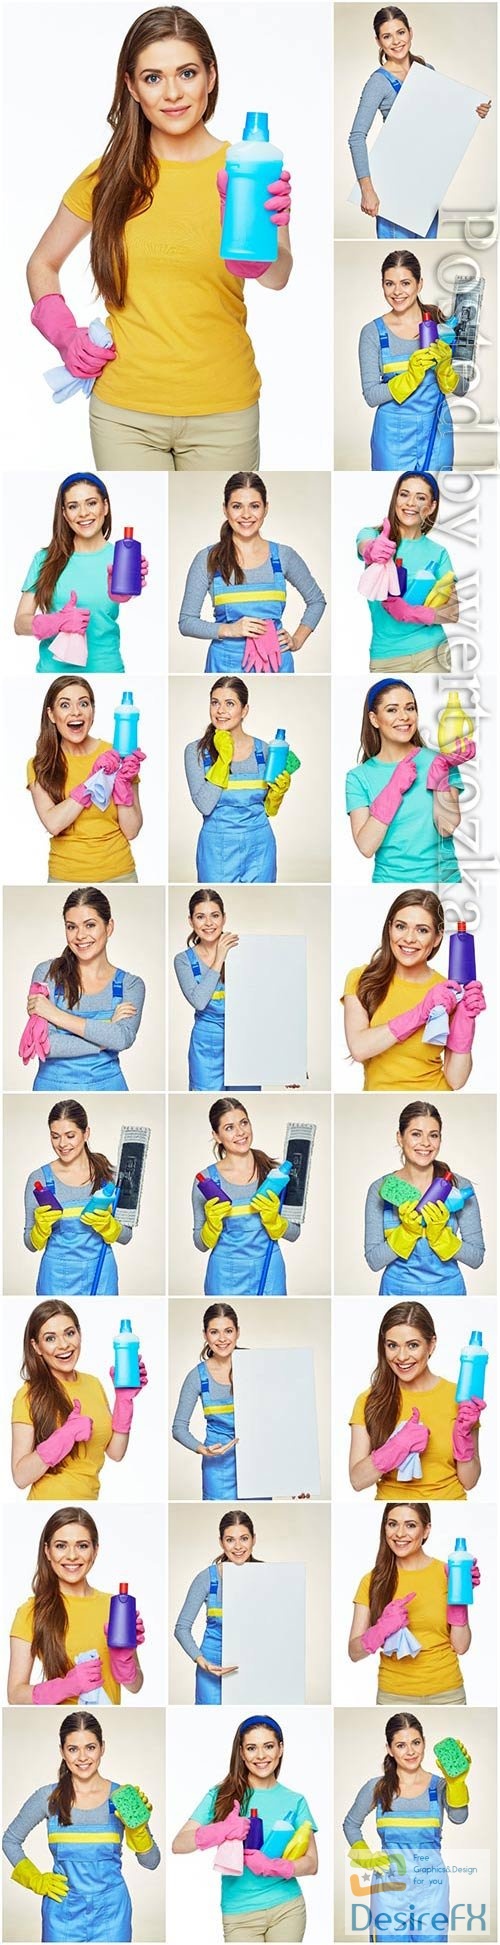 Cleaning service, girl with cleaning products stock photo